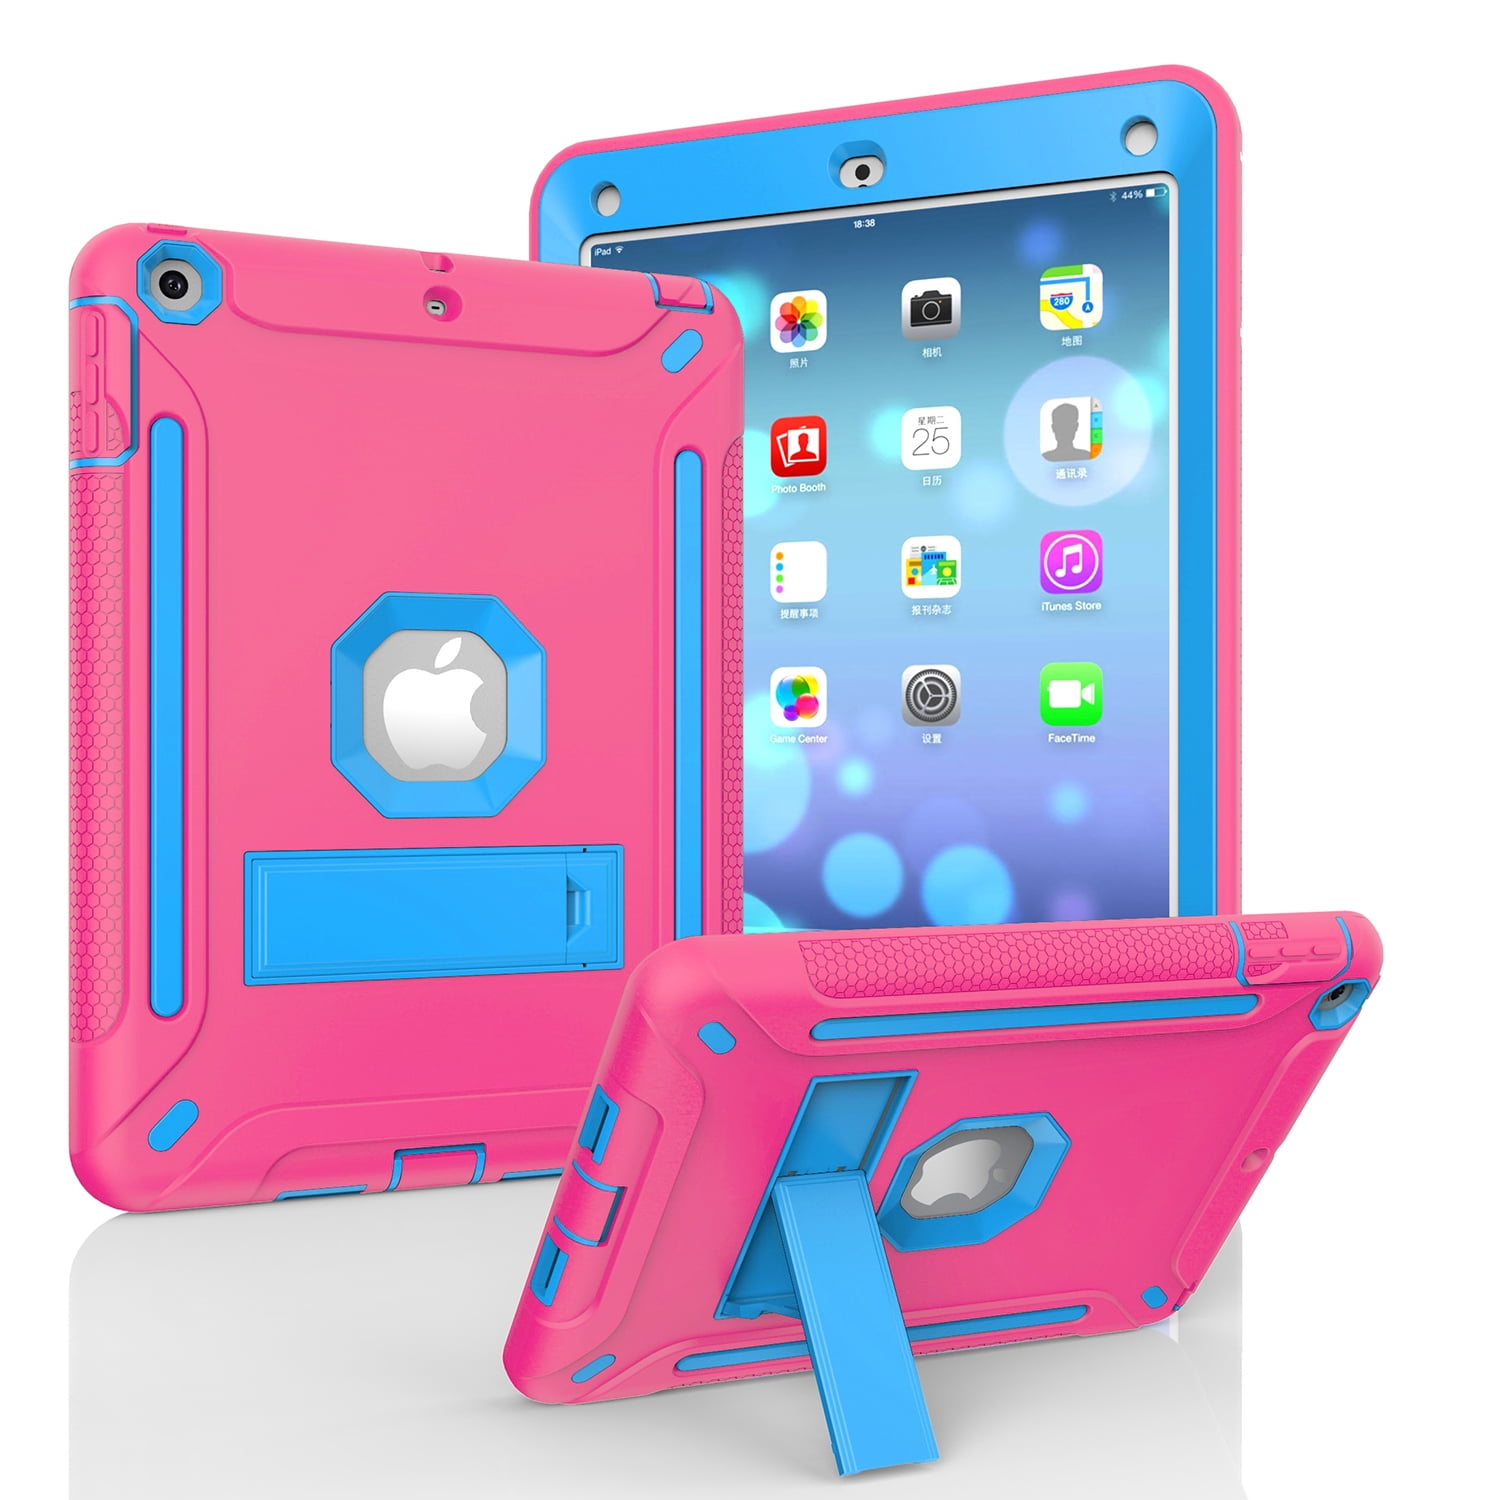 Allytech iPad Air 1st Generation Shockproof, Lightweight Silicone Shock Absorbing Kickstand Anti-Slip Kids Friendly Drop Case Cover for Apple iPad Air 9.7 Tablet, Rose+Blue - Walmart.com